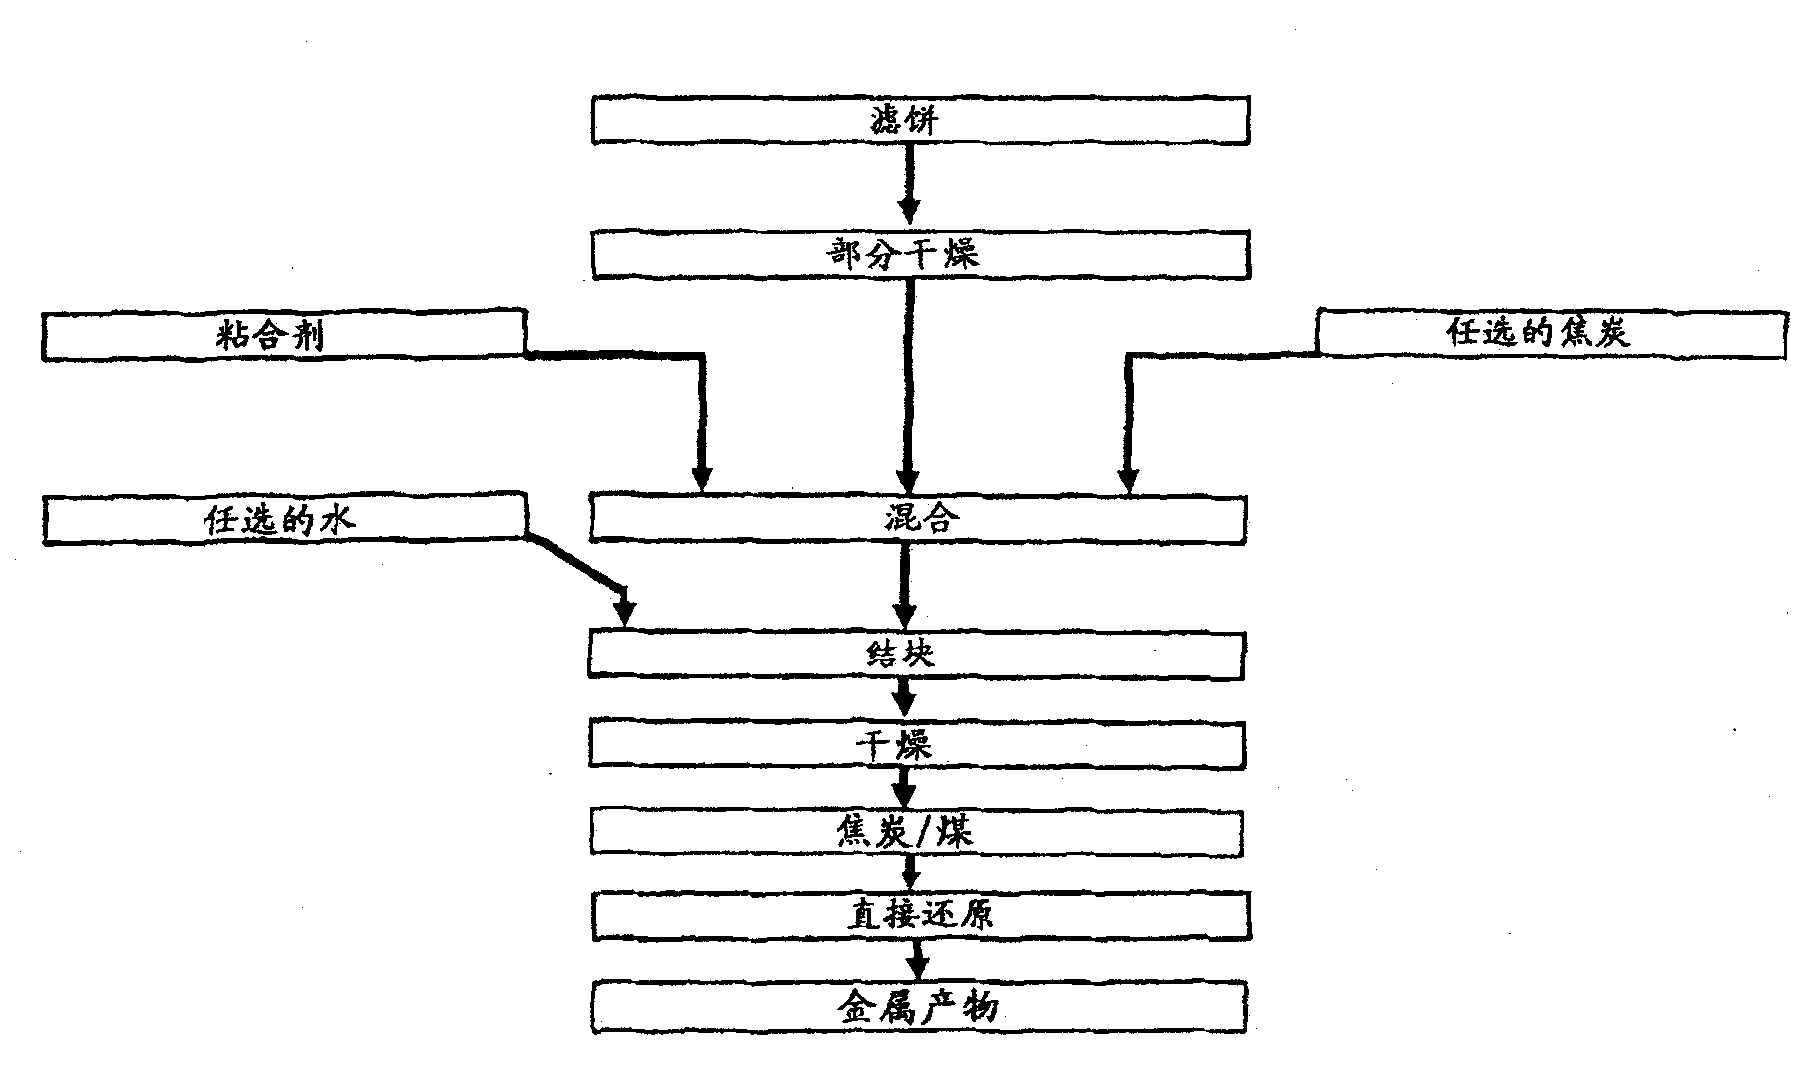 Process for producing nickel and cobalt using metal hydroxides, metal oxides and/or metal carbonates